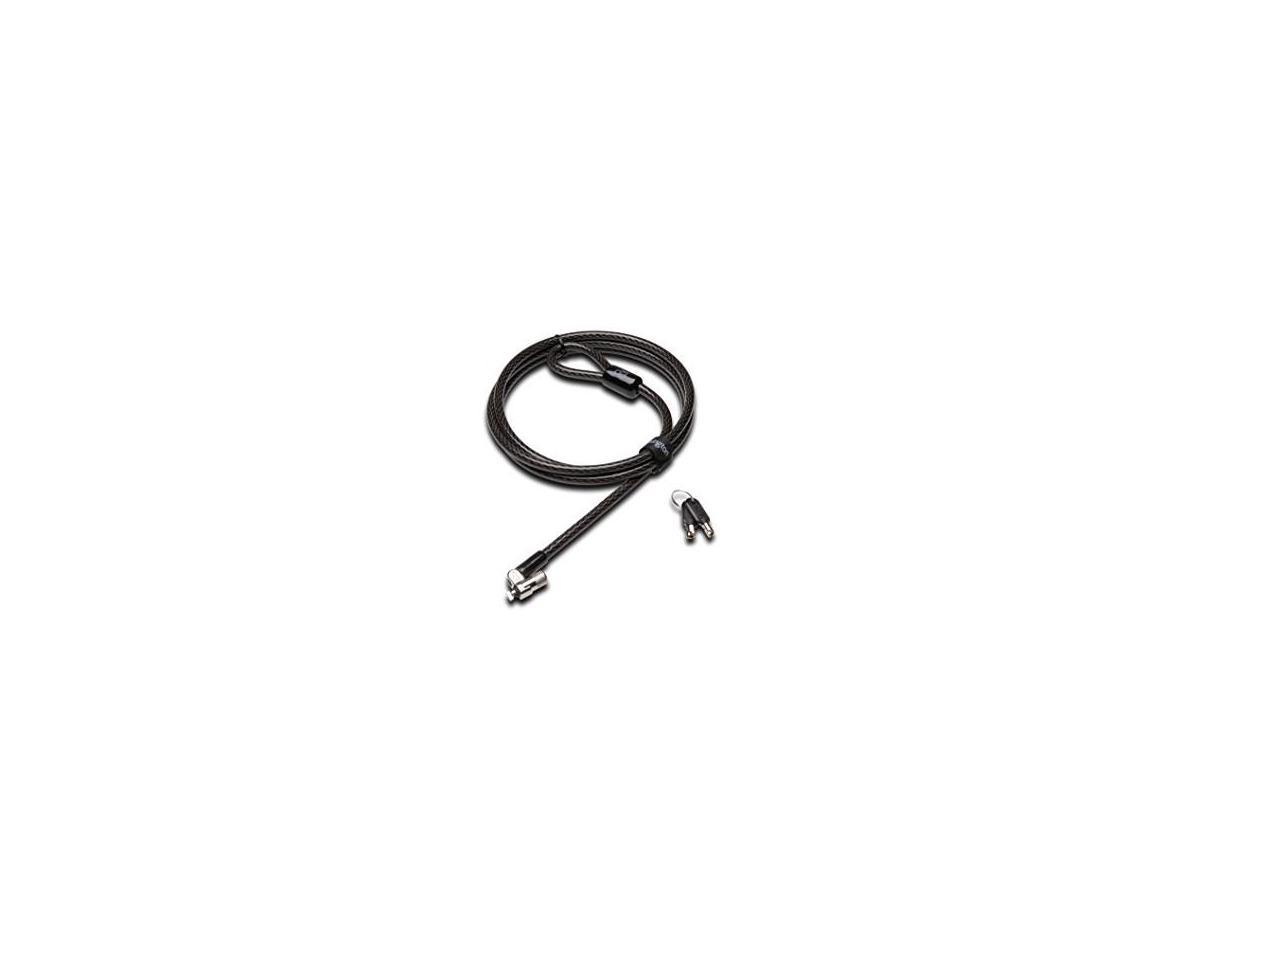 Kensington MicroSaver 2.0 Keyed Ultra Cable Lock for Laptops & Other Devices (K64432WW)